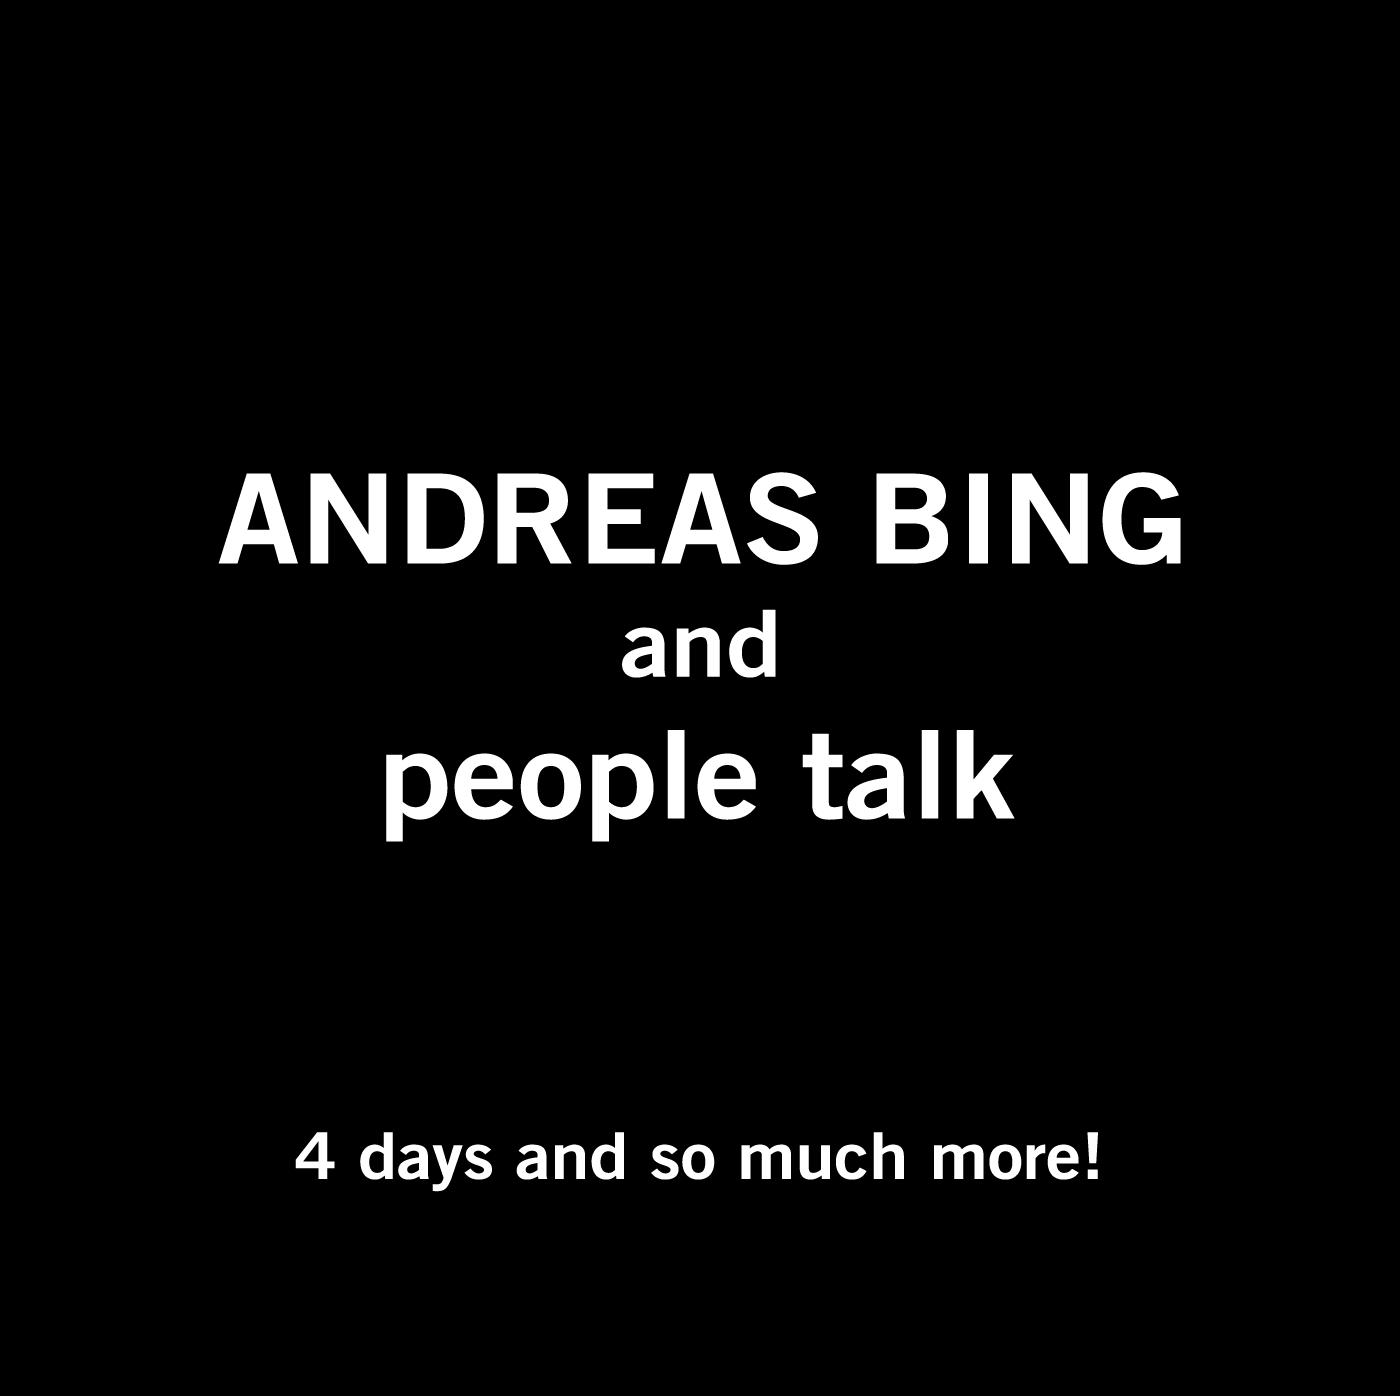 Andreas Bing and people talk